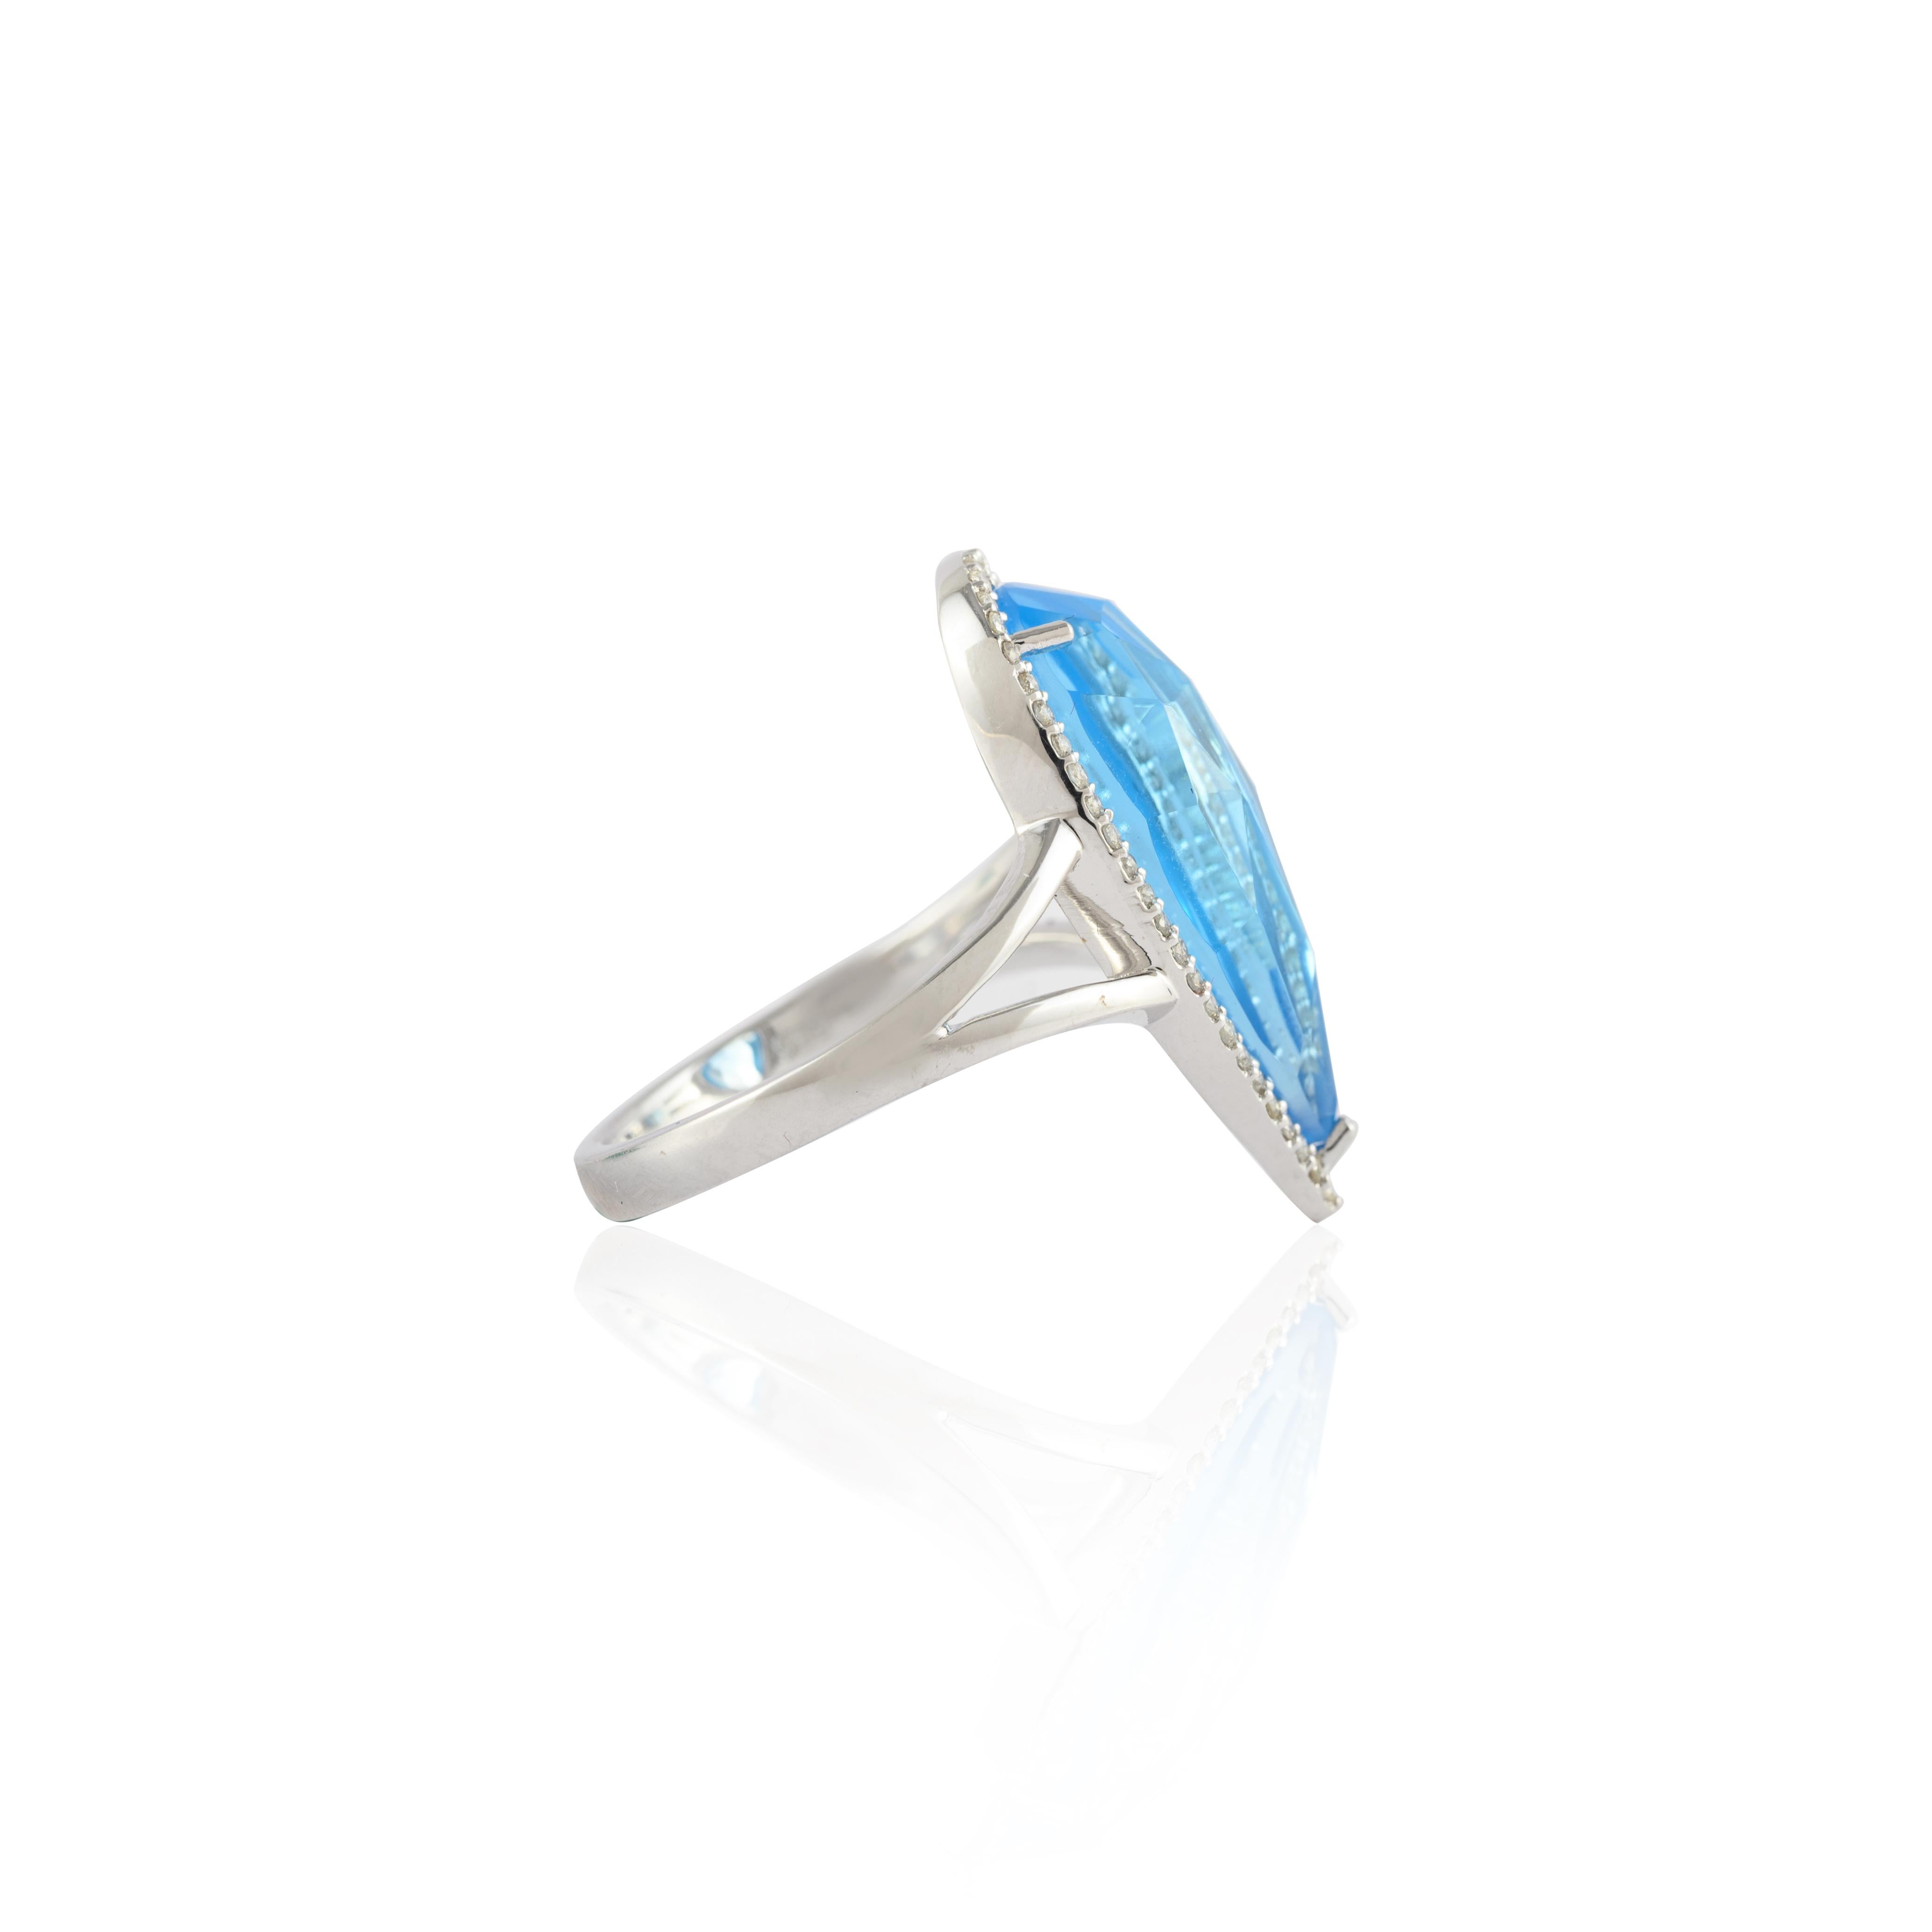 For Sale:  Glitzy 6.82 Carat Pear Blue Topaz Diamond Cocktail Ring in 14k Solid White Gold 5